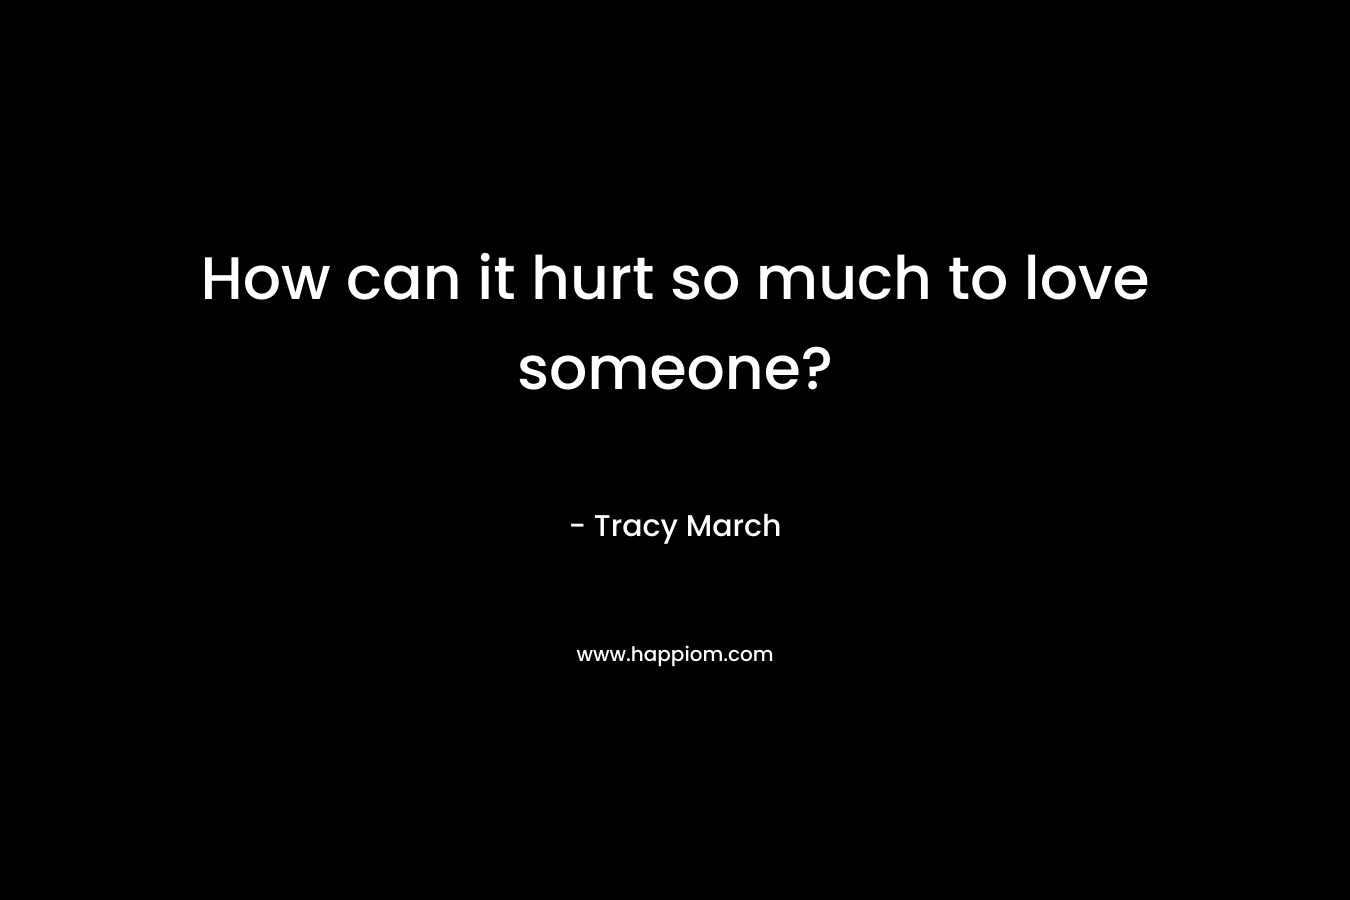 How can it hurt so much to love someone?